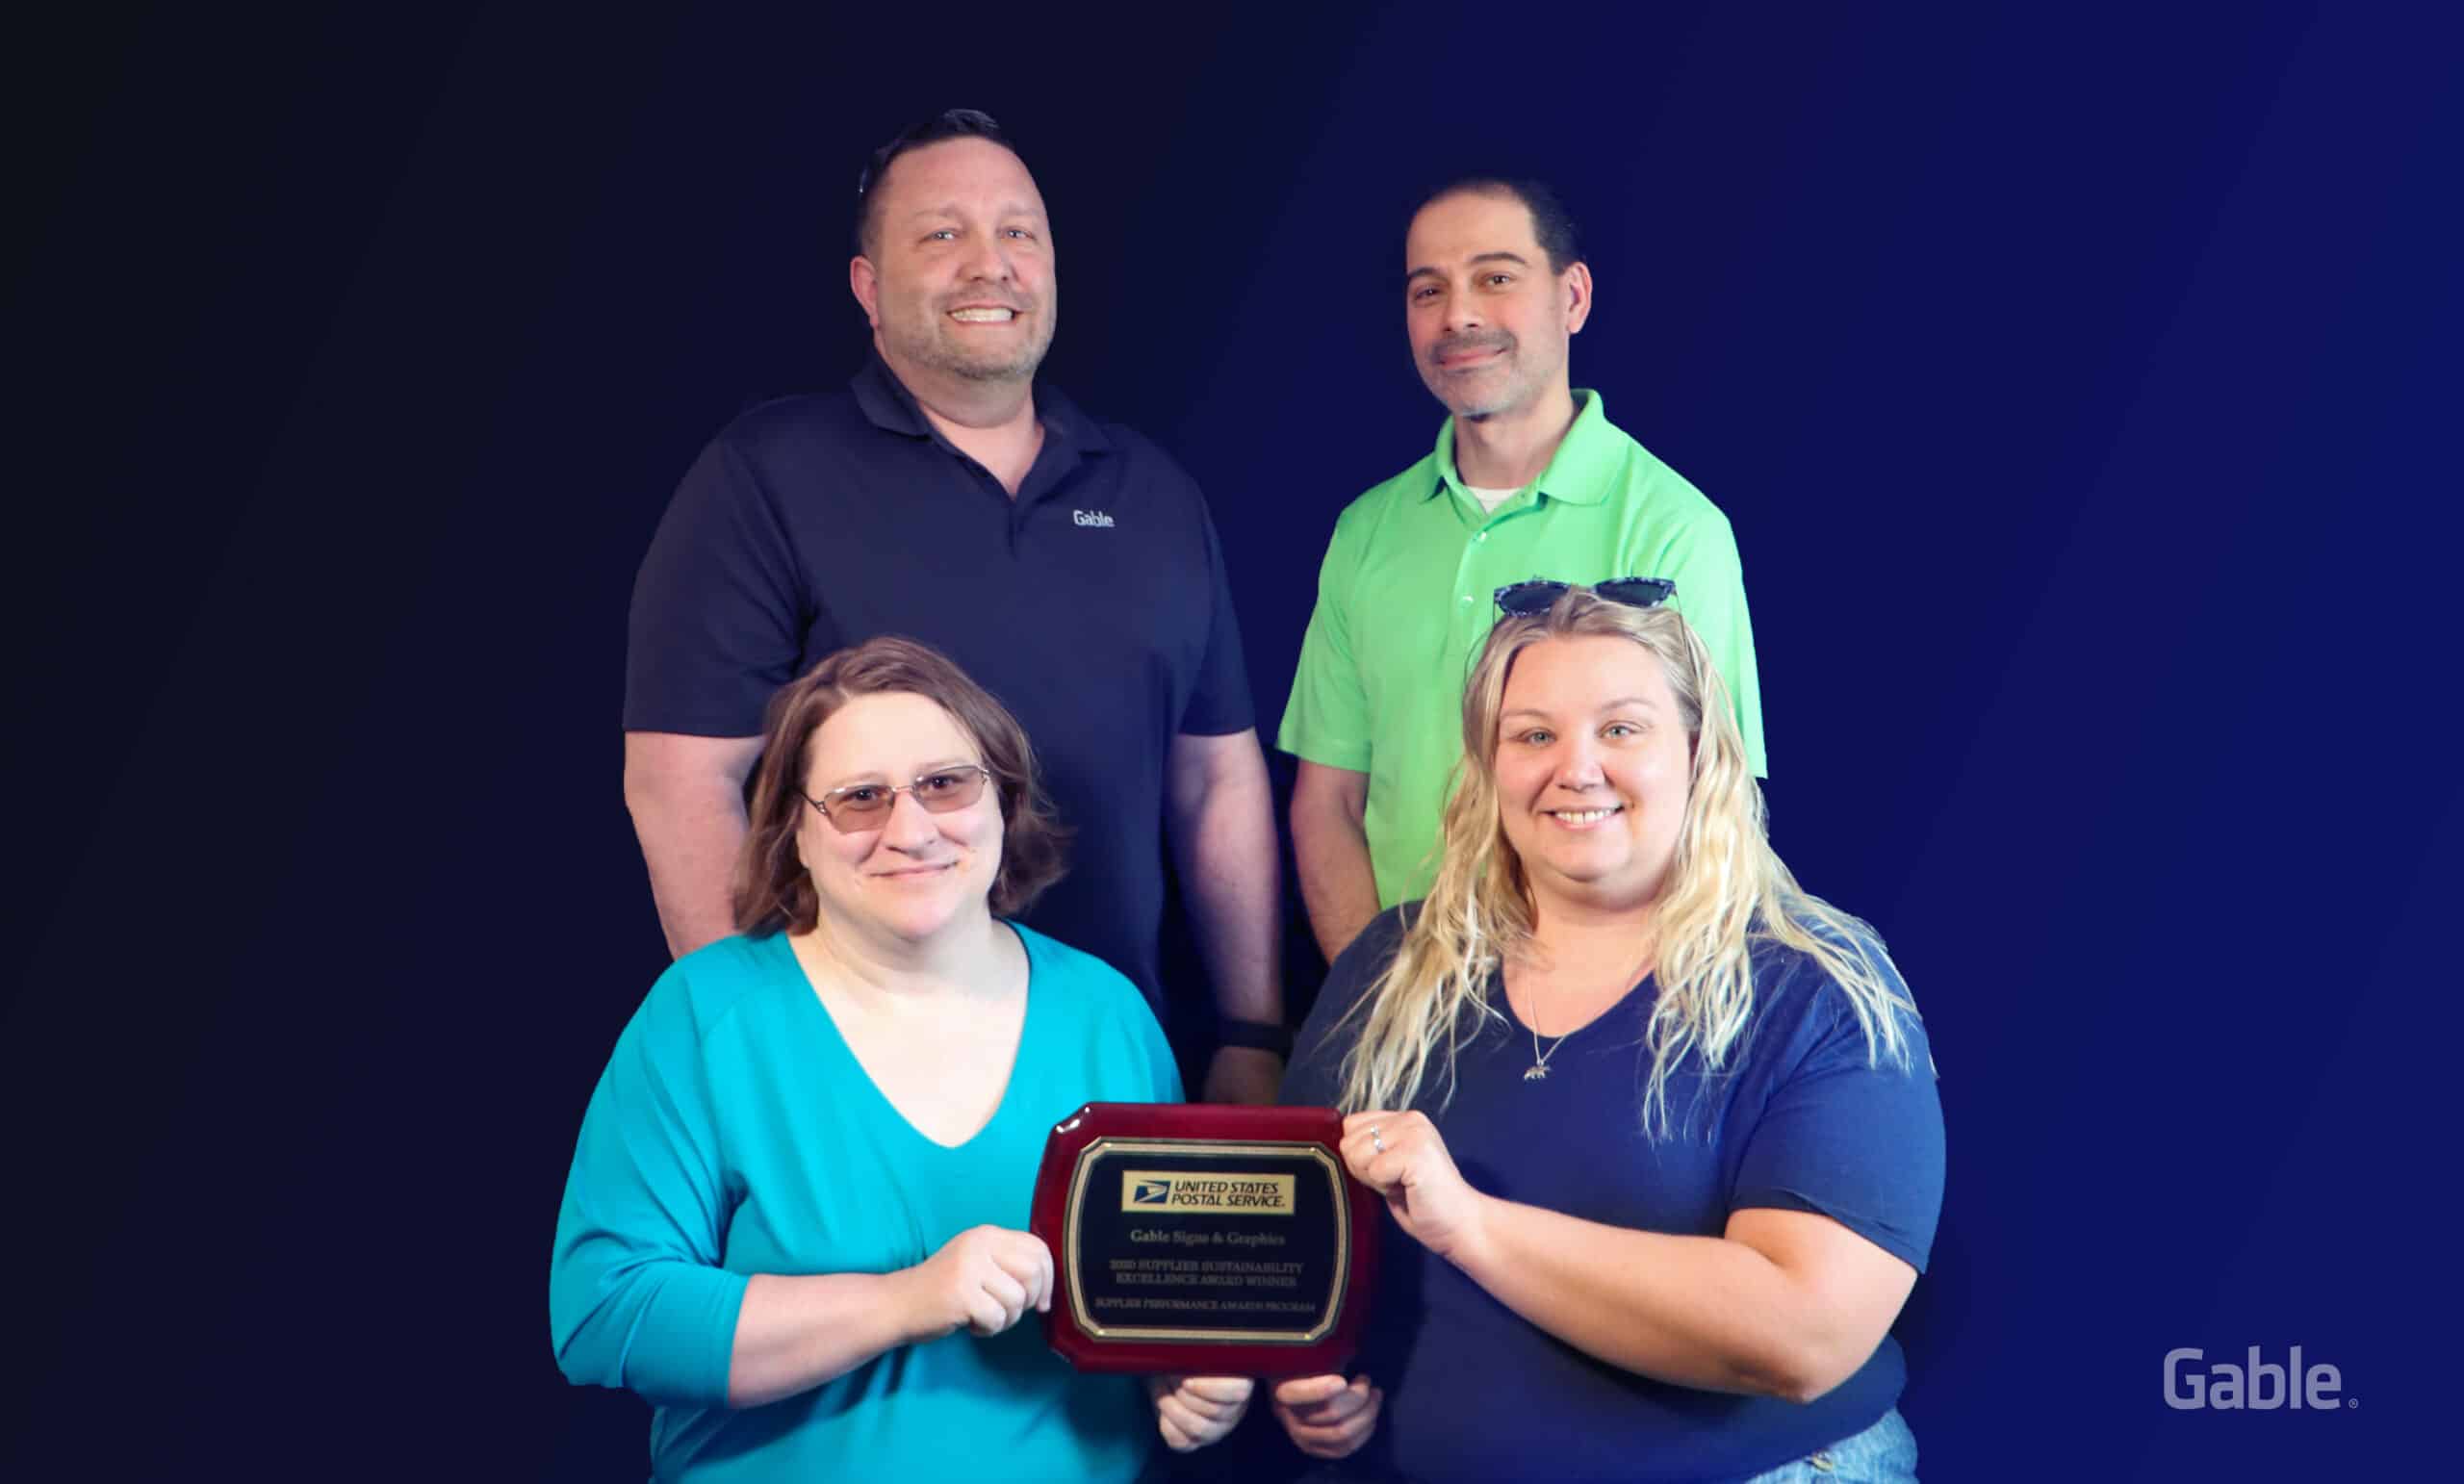 Gable Receives Supplier Performance Award for Excellence from the United States Postal Service